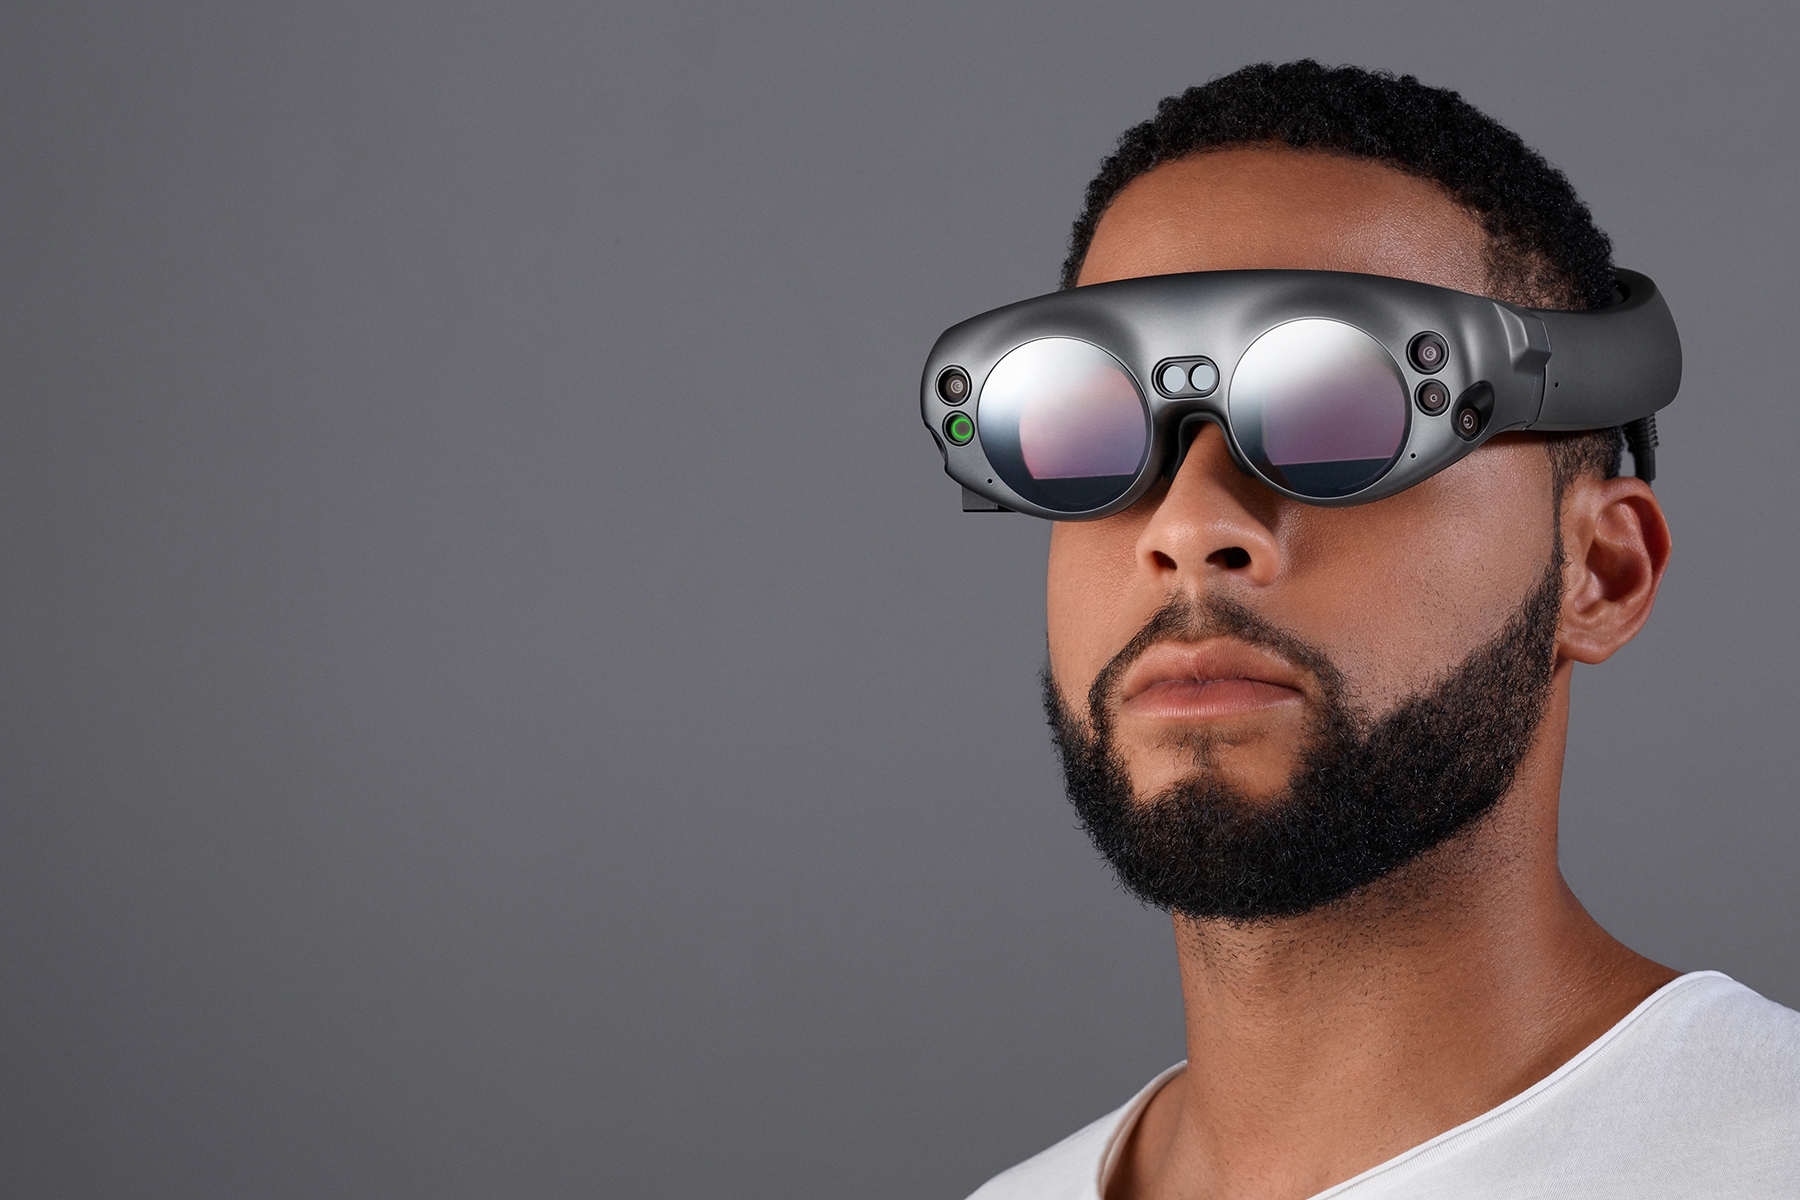 Magic Leap developer units must be kept in locked safes | DeviceDaily.com